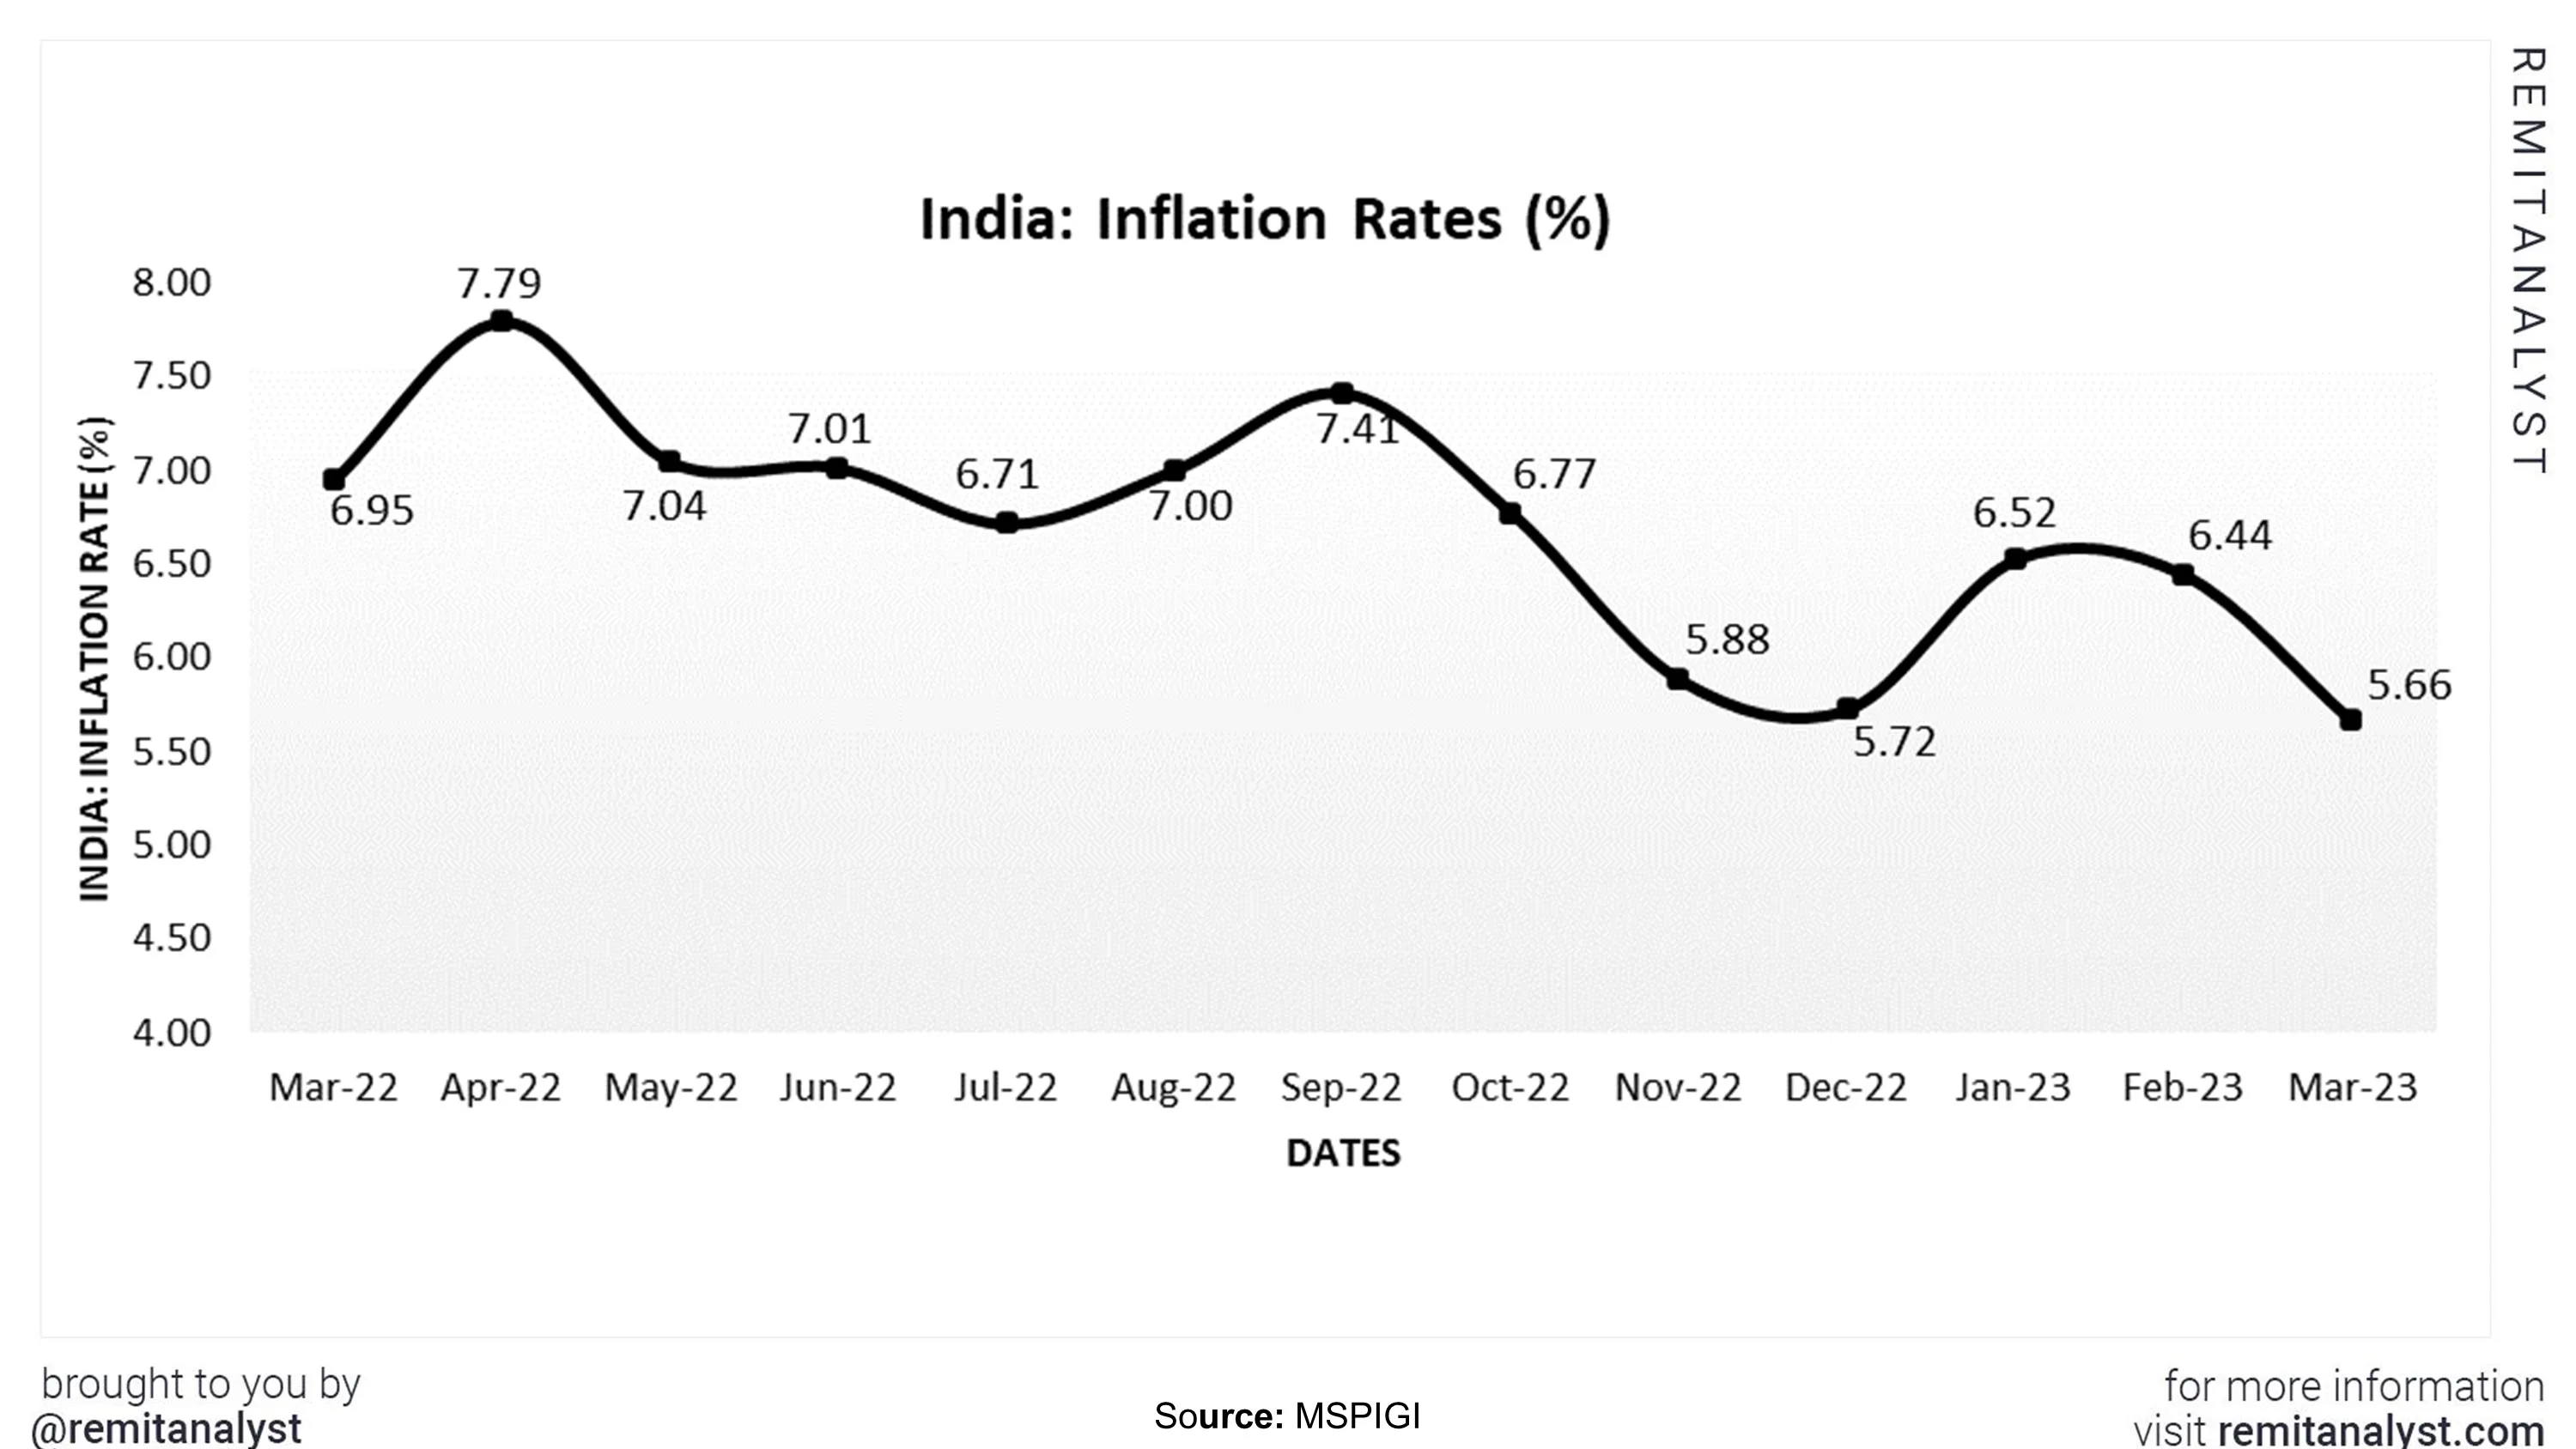 inflation-rates-in-india-from-mar-2022-to-mar-2023